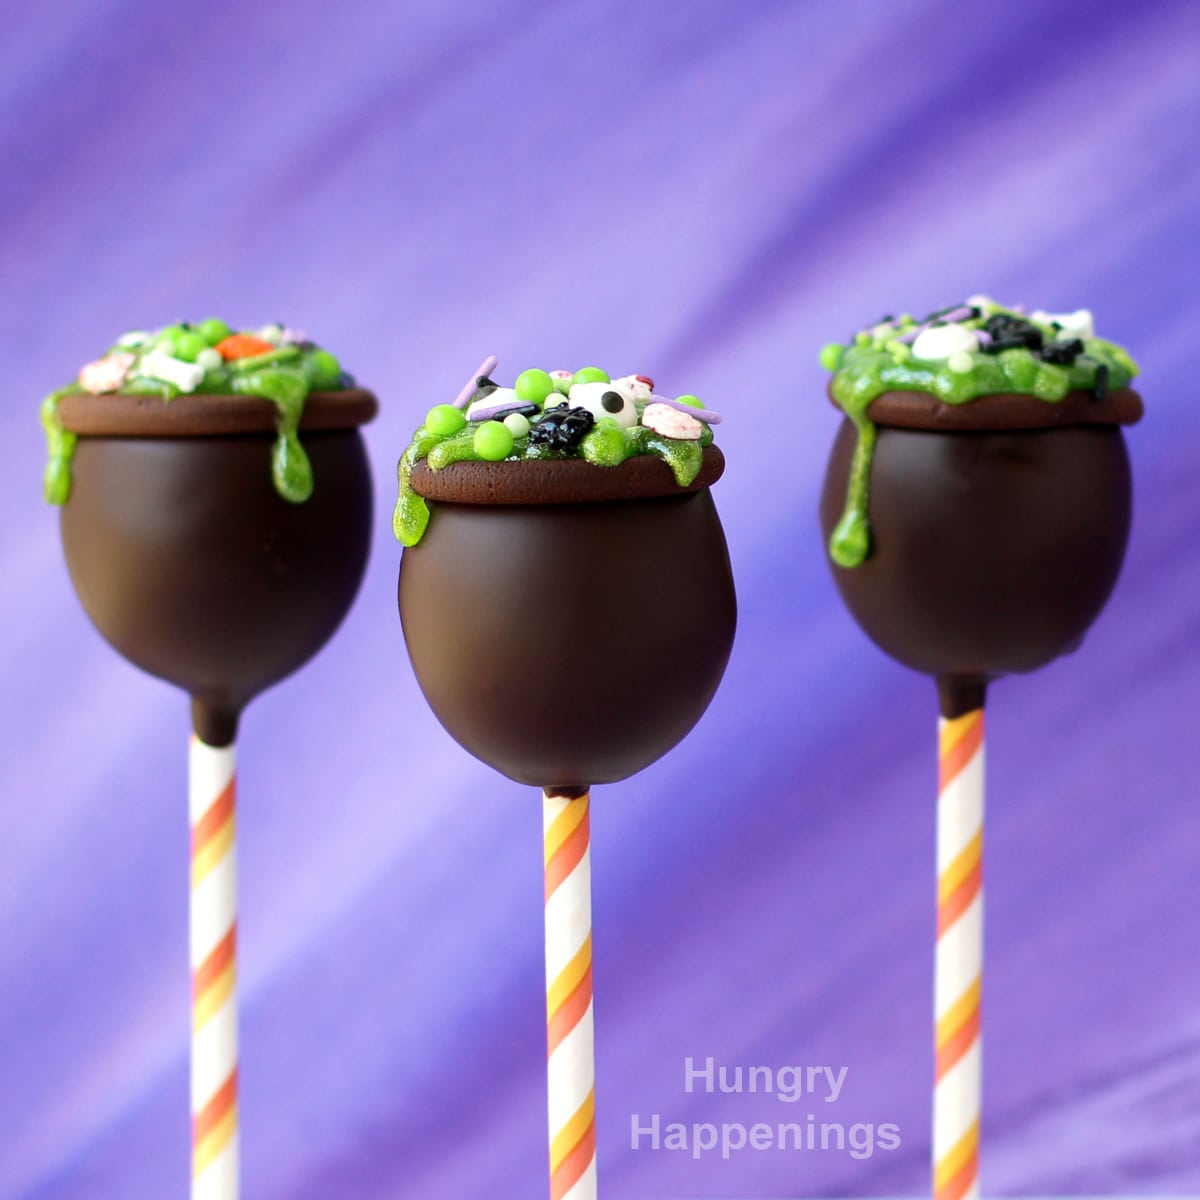 chocolate peanut butter cauldron pops topped with green slime gel and candy bones, eyes, and skulls.